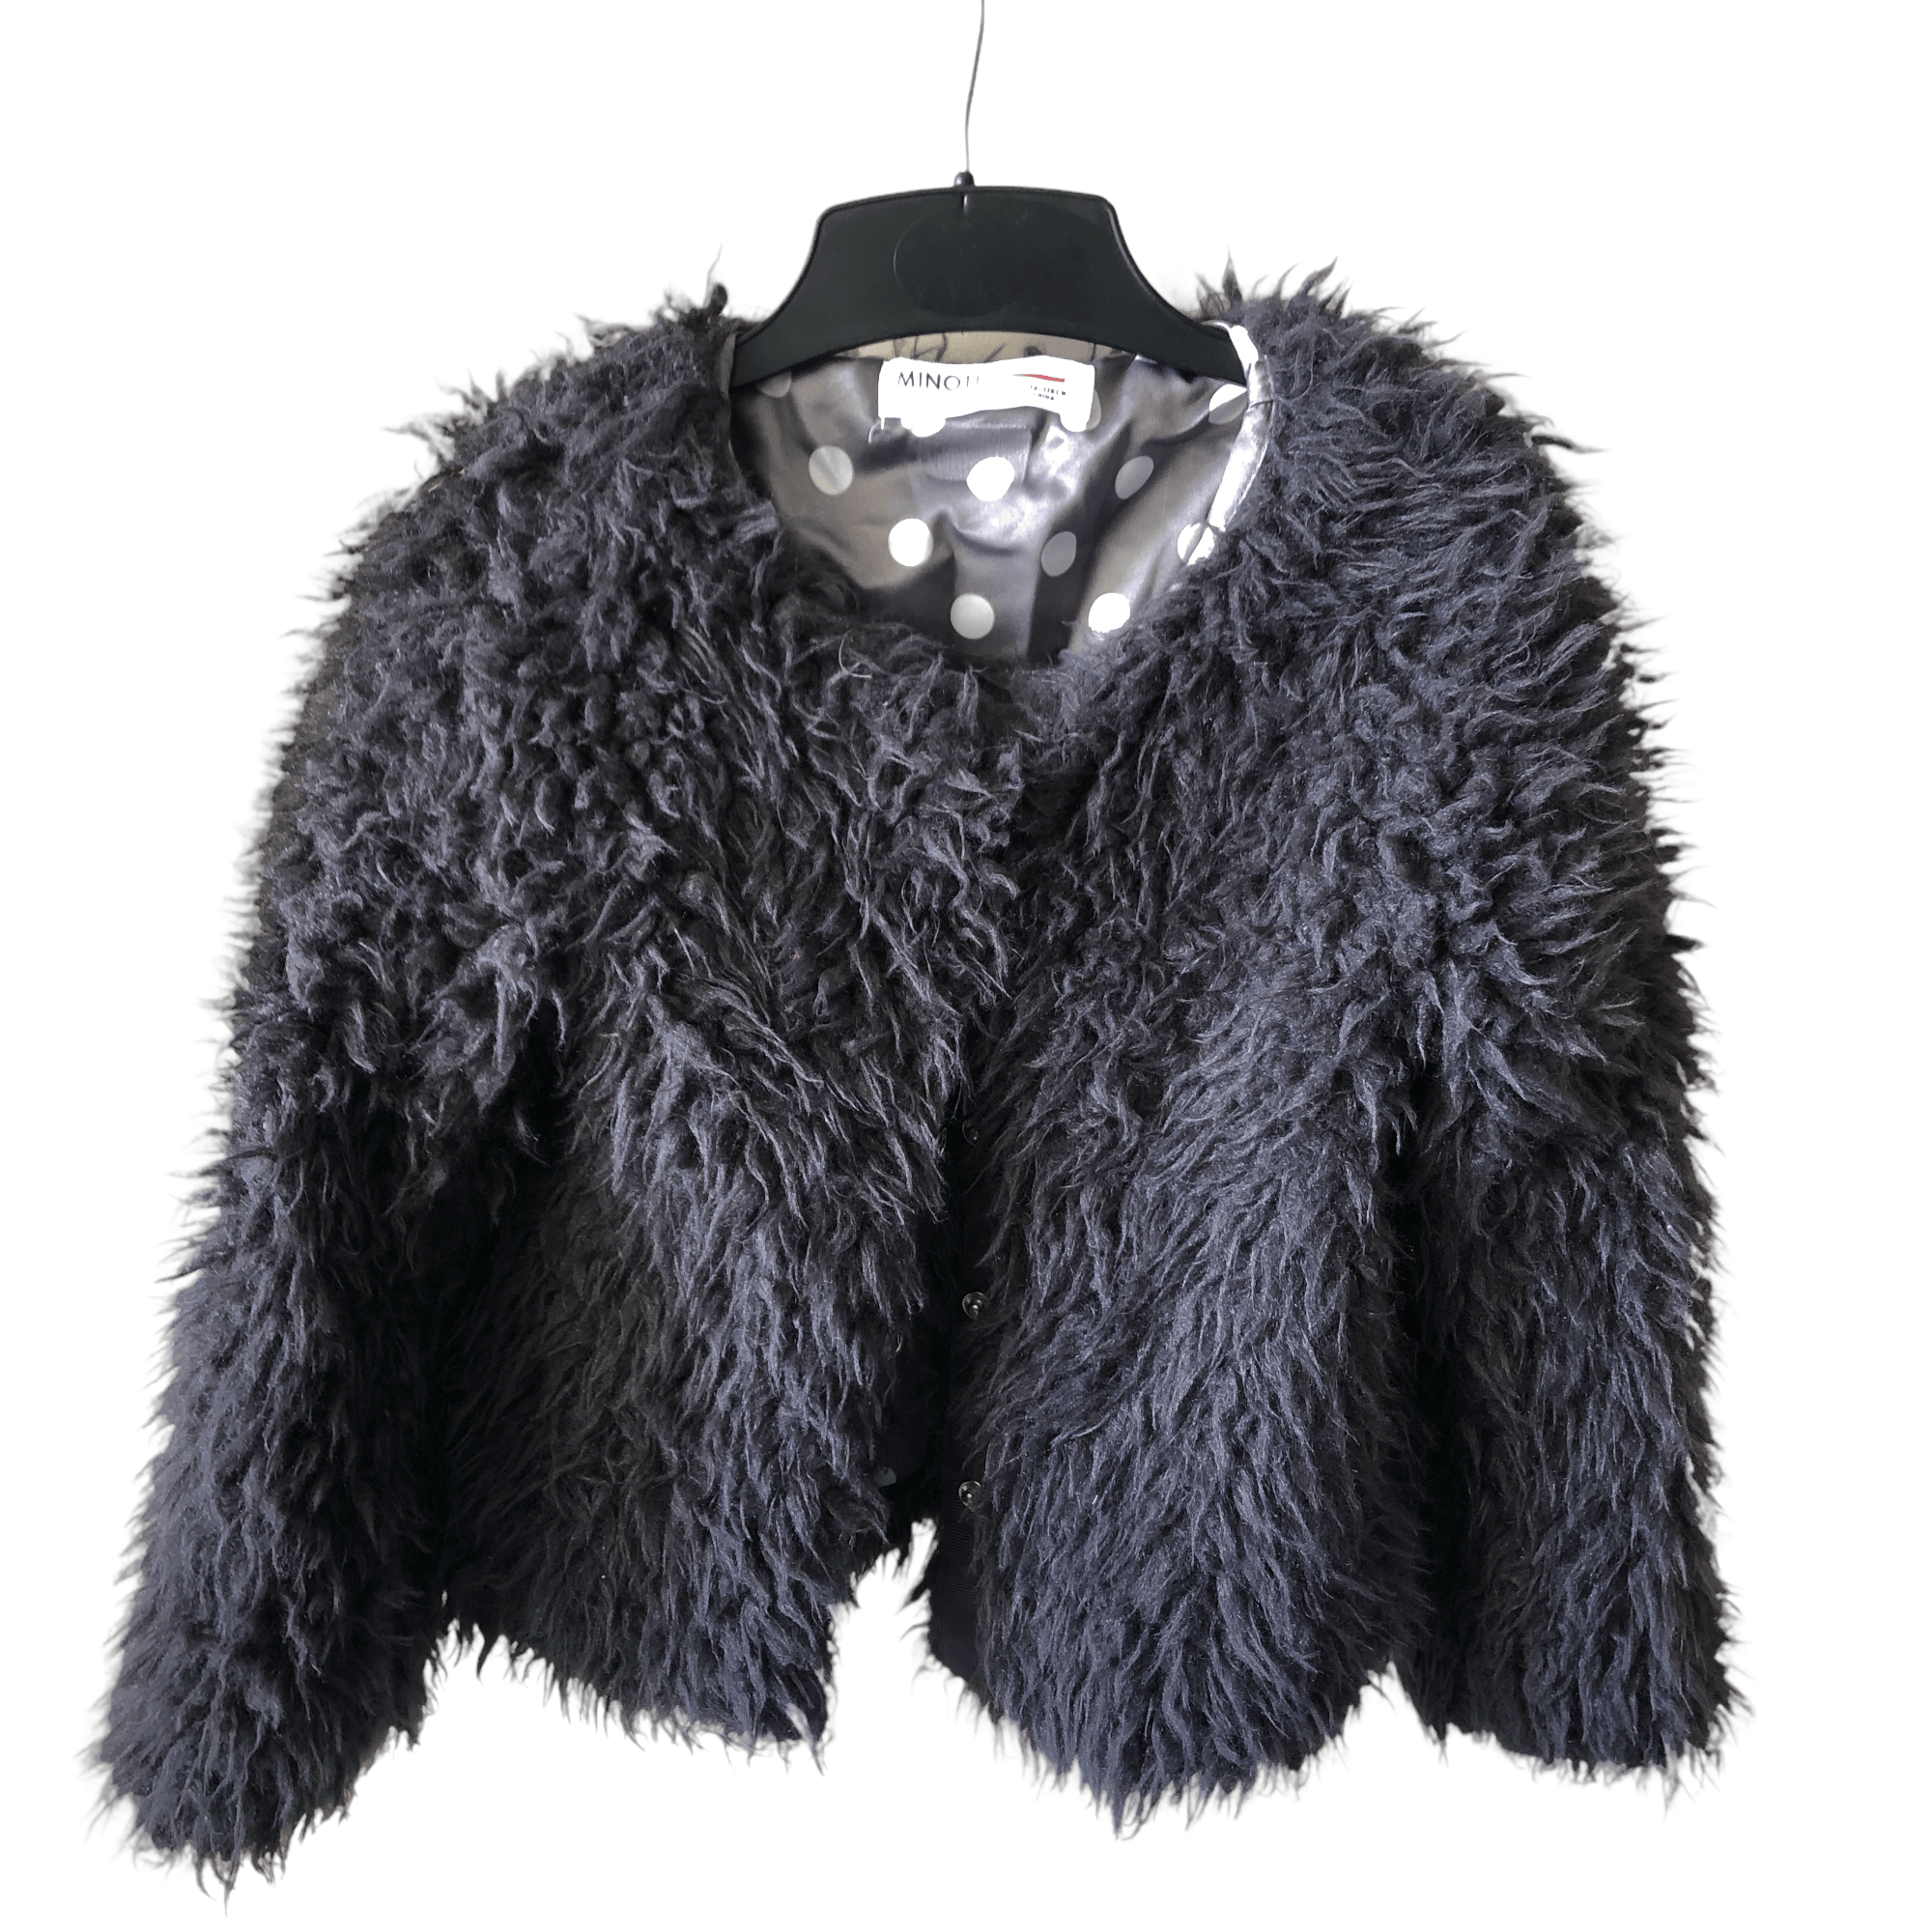 Pre-Owned Minoti Girls Faux Fur Jacket (Size 4-5) The Re-Generation